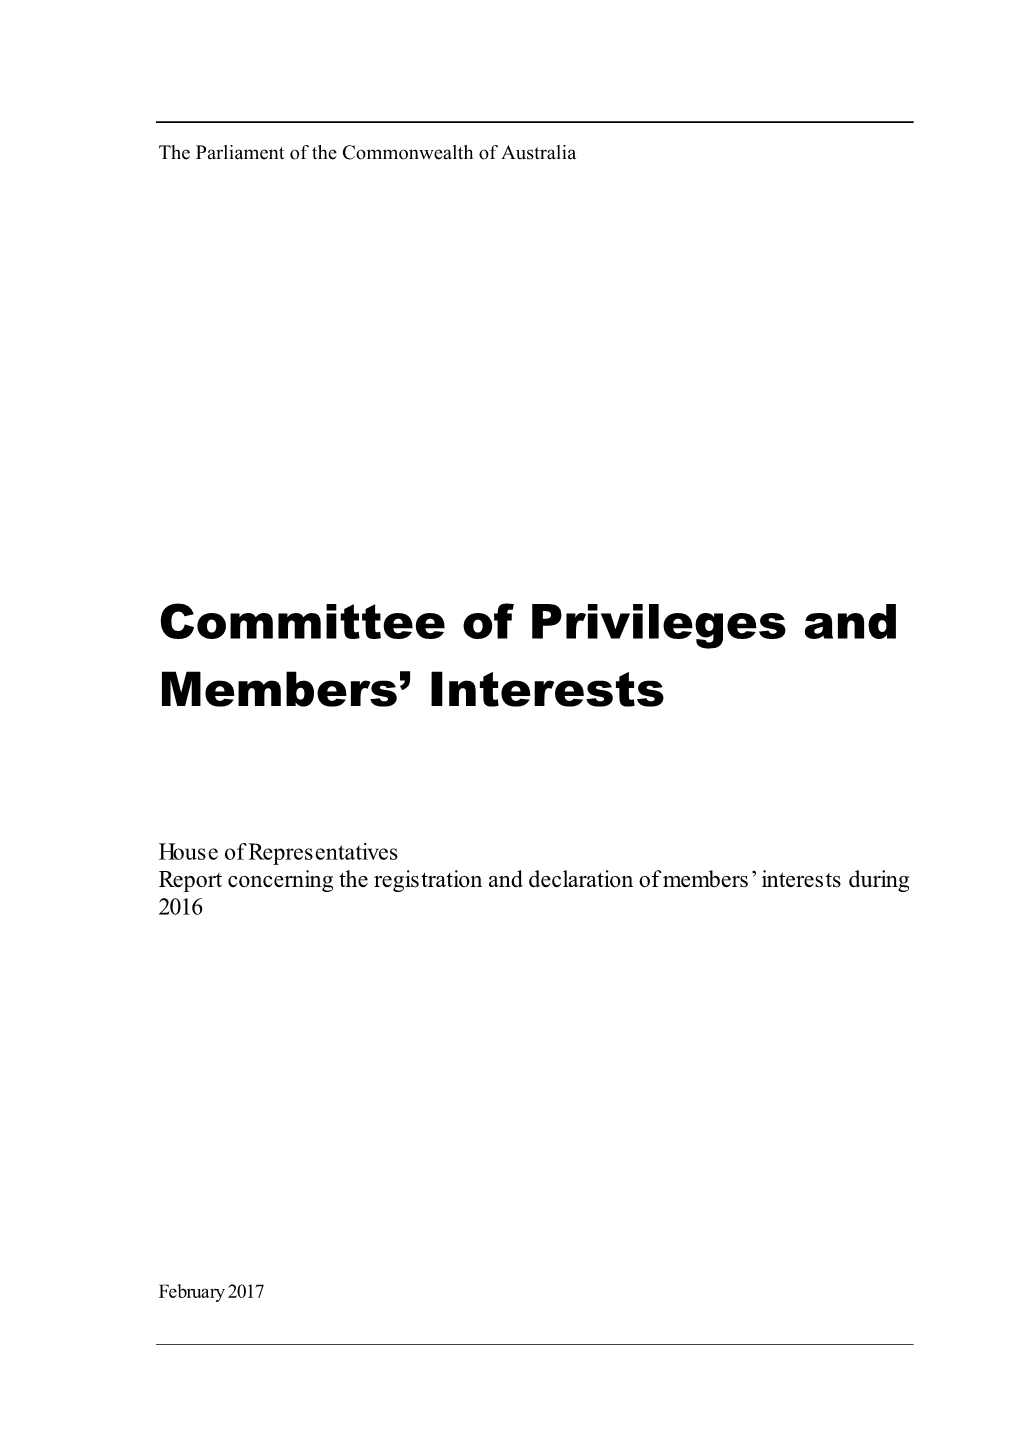 Committee of Privileges and Members' Interests